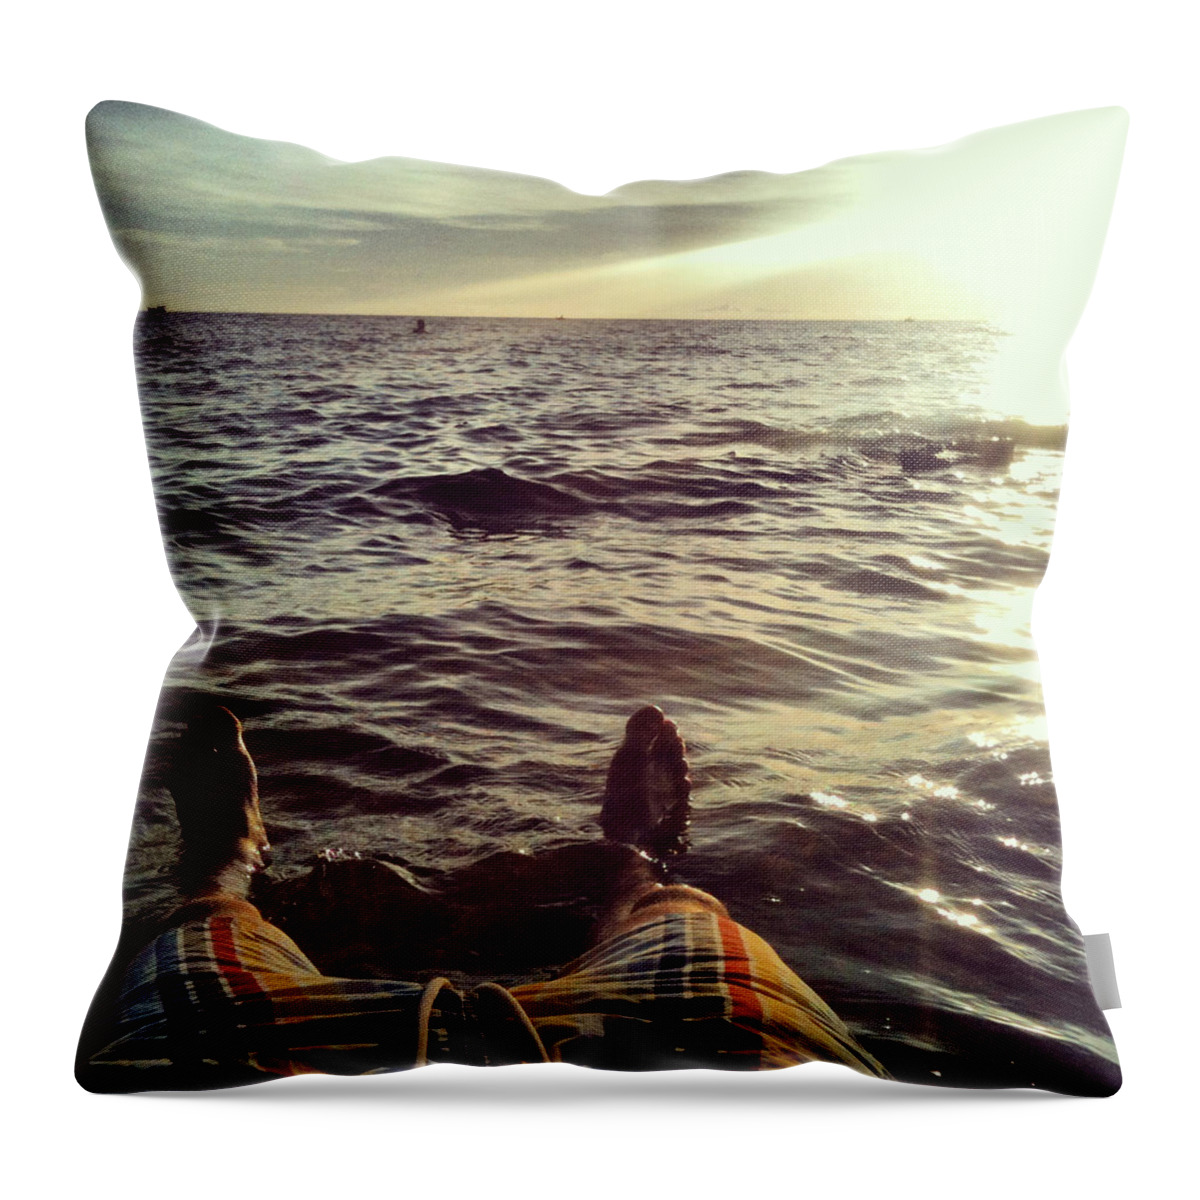 People Throw Pillow featuring the photograph Feet In The Sea By The Beach by Lasse Kristensen